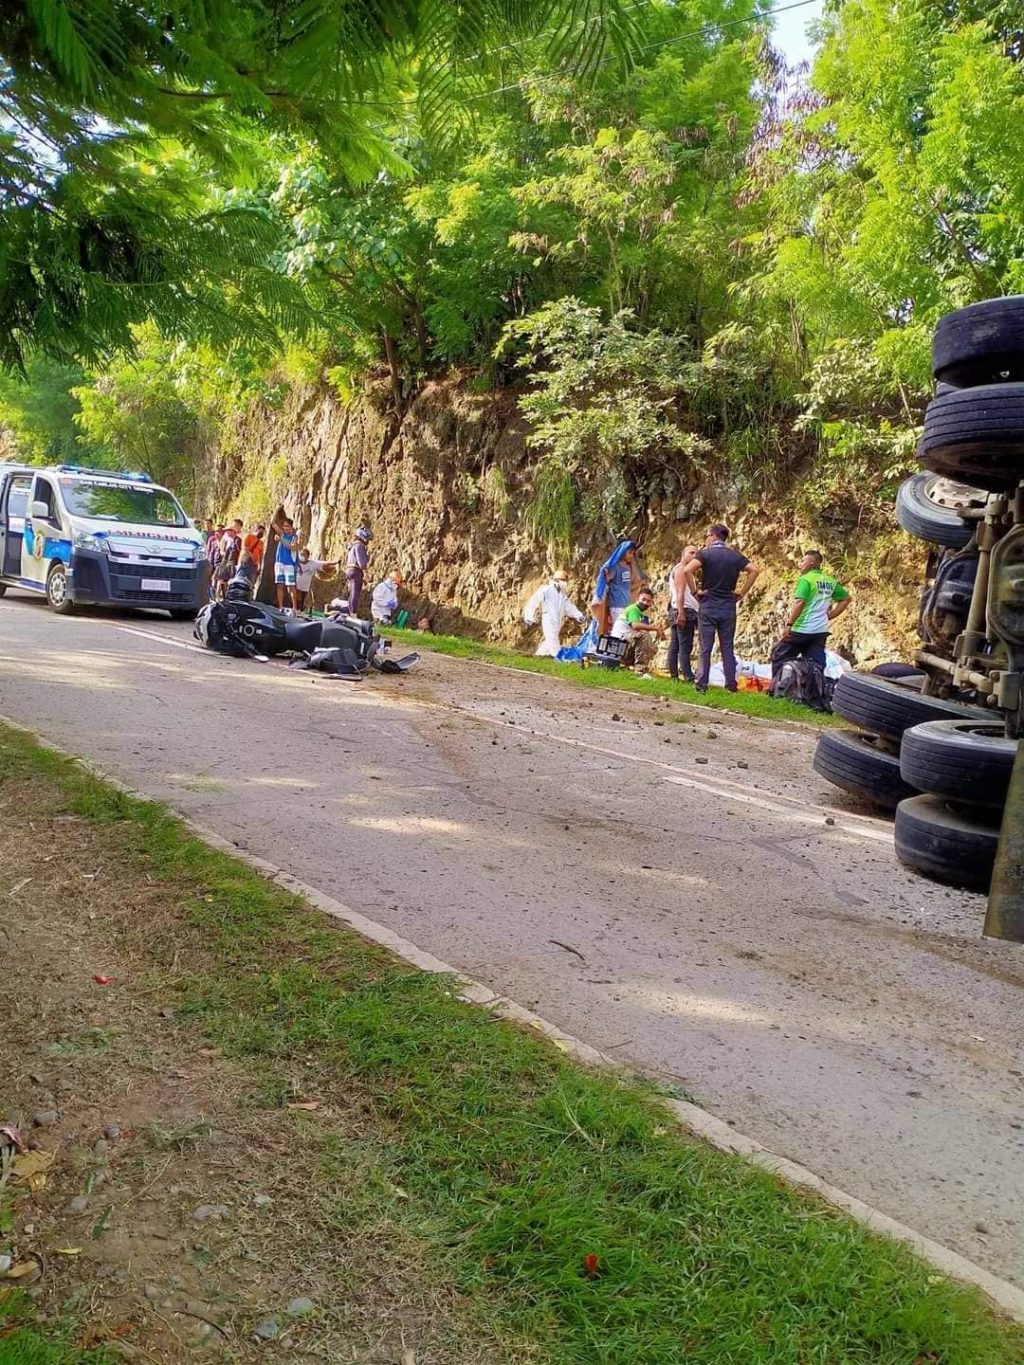 This is the accident site at the Ecotourism National Highway in San Carlos City, Negros Occidental. A dumptruck slammed into the convoy of motorcycles with Berbo in the lead. Berbo died in the accident. | Contributed photo via Paul Lauro